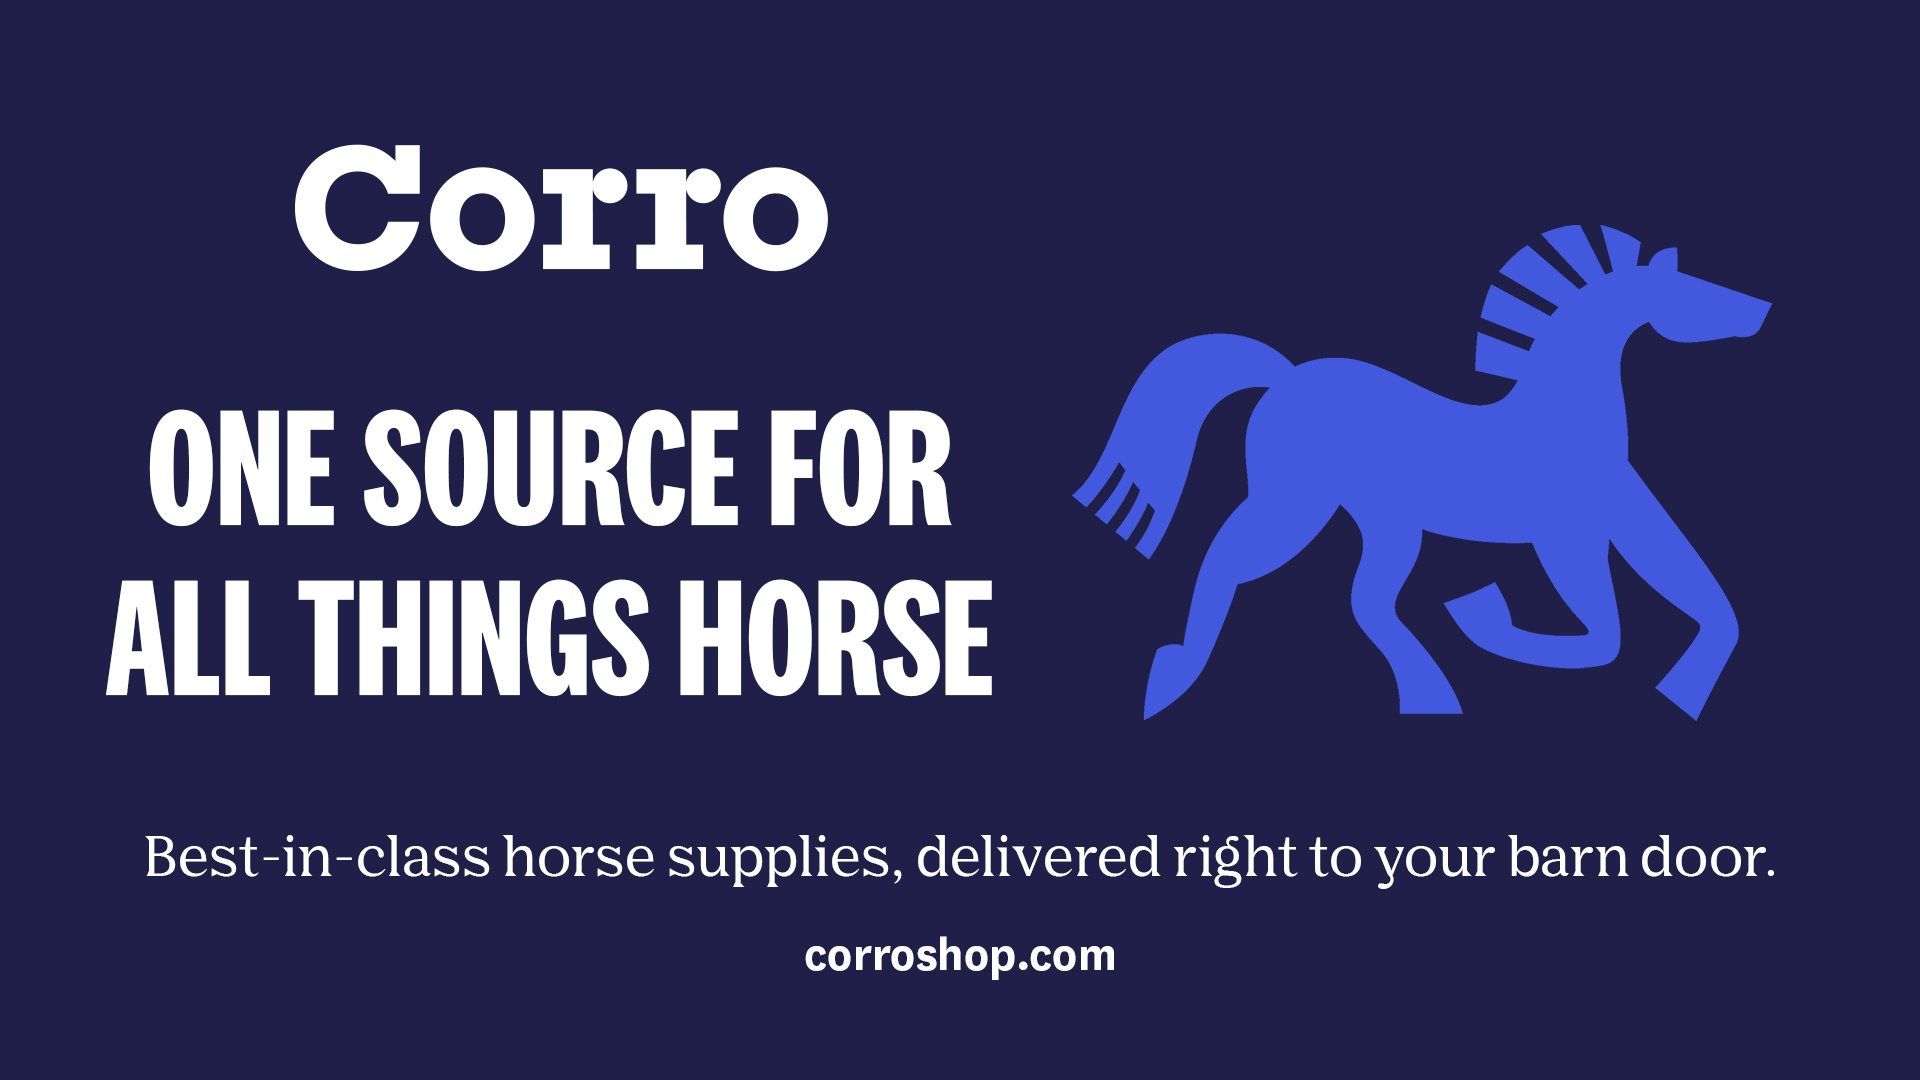 Corro Introduces One Source for All Things Horse